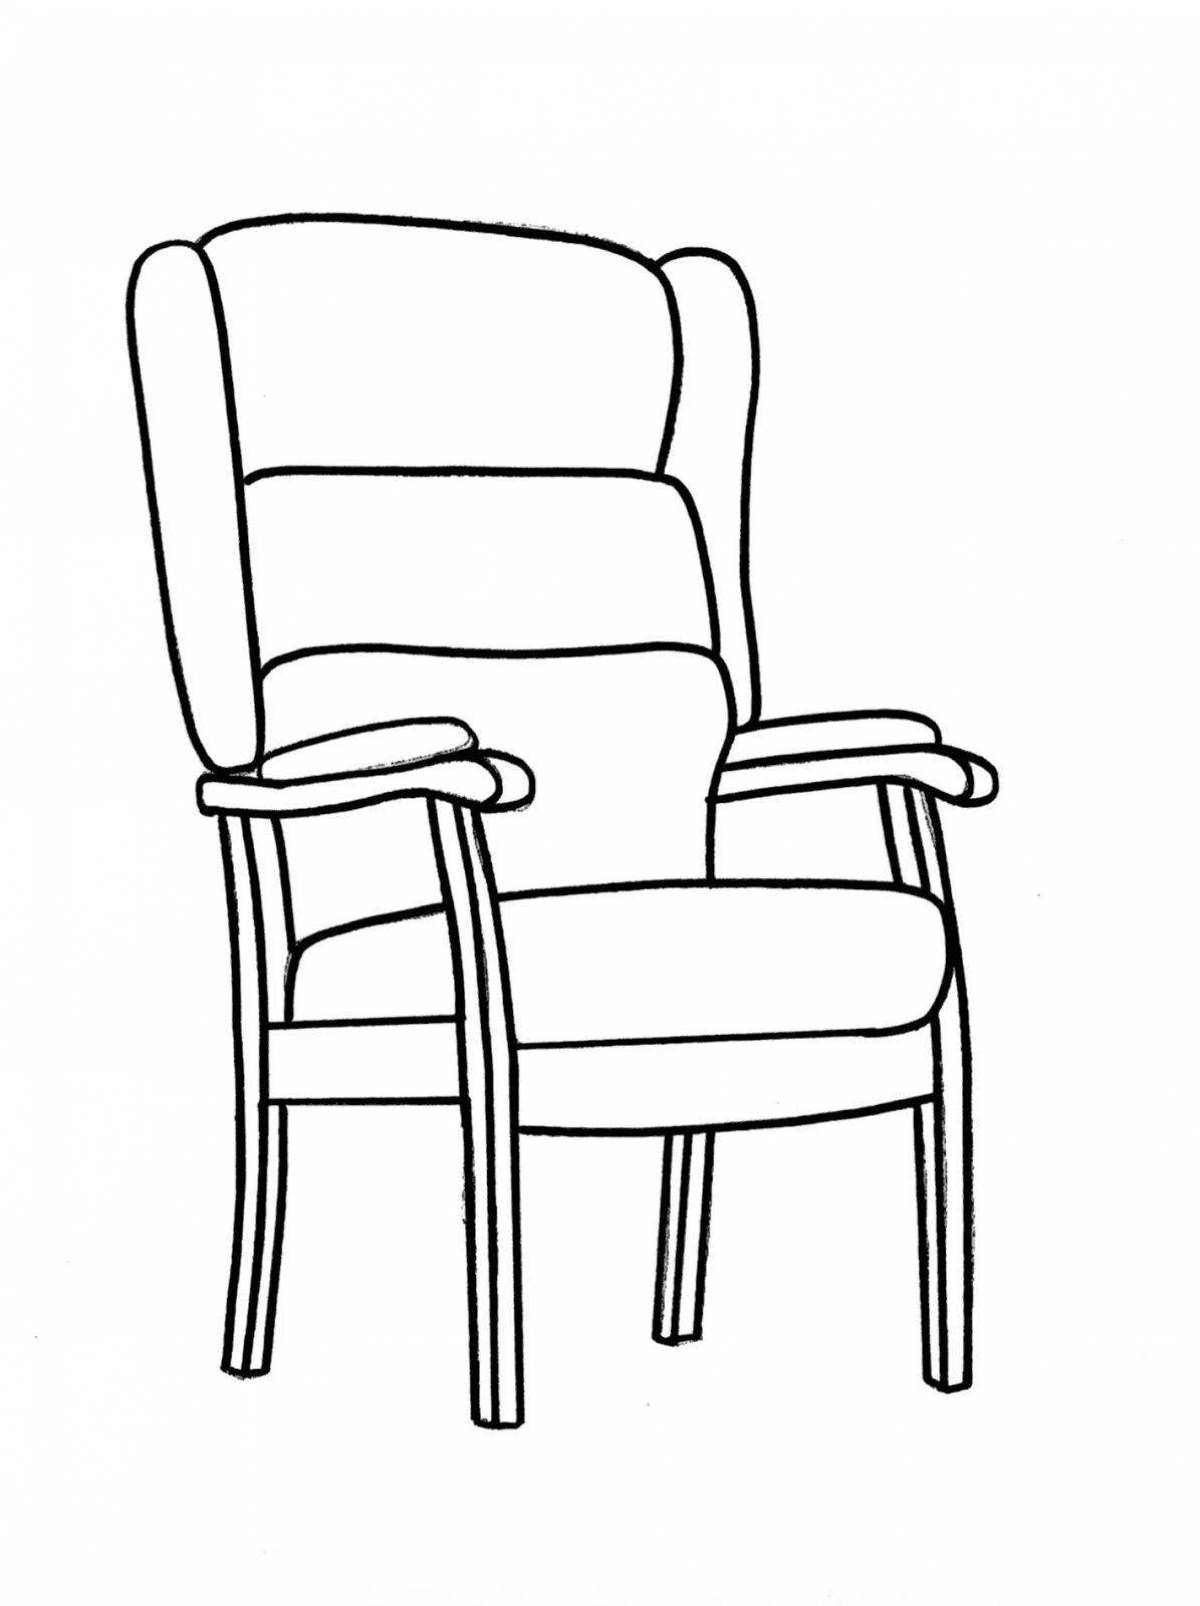 Entertaining coloring chair for children 3-4 years old